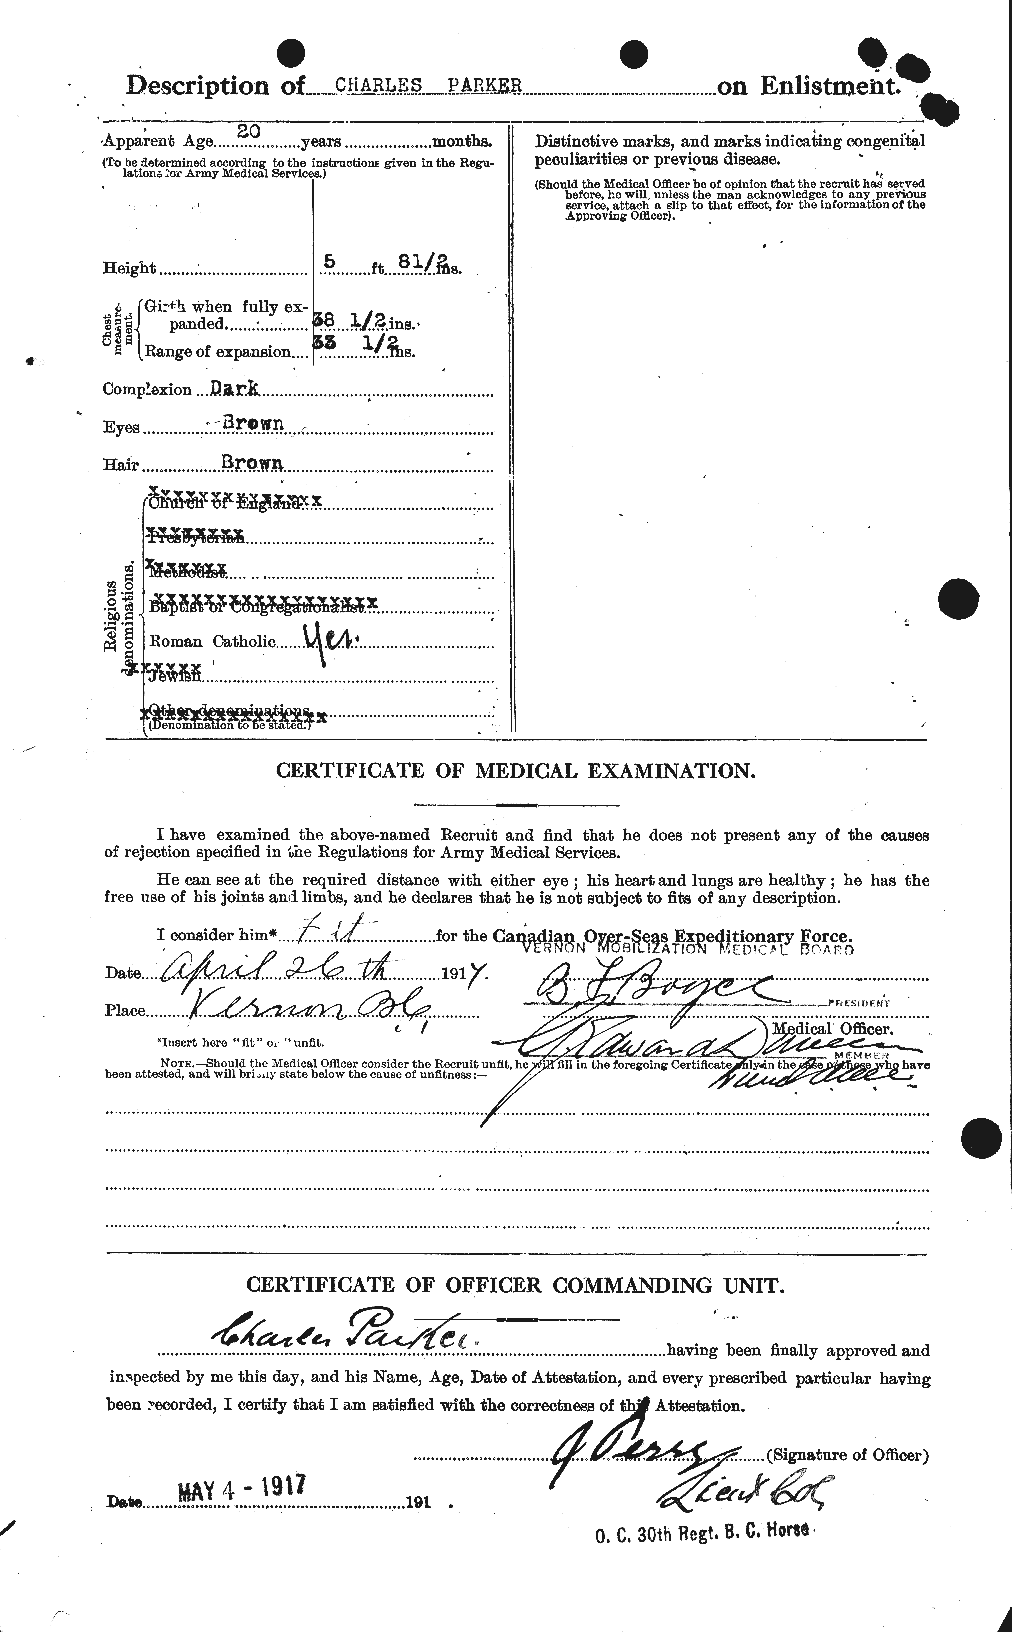 Personnel Records of the First World War - CEF 565056b